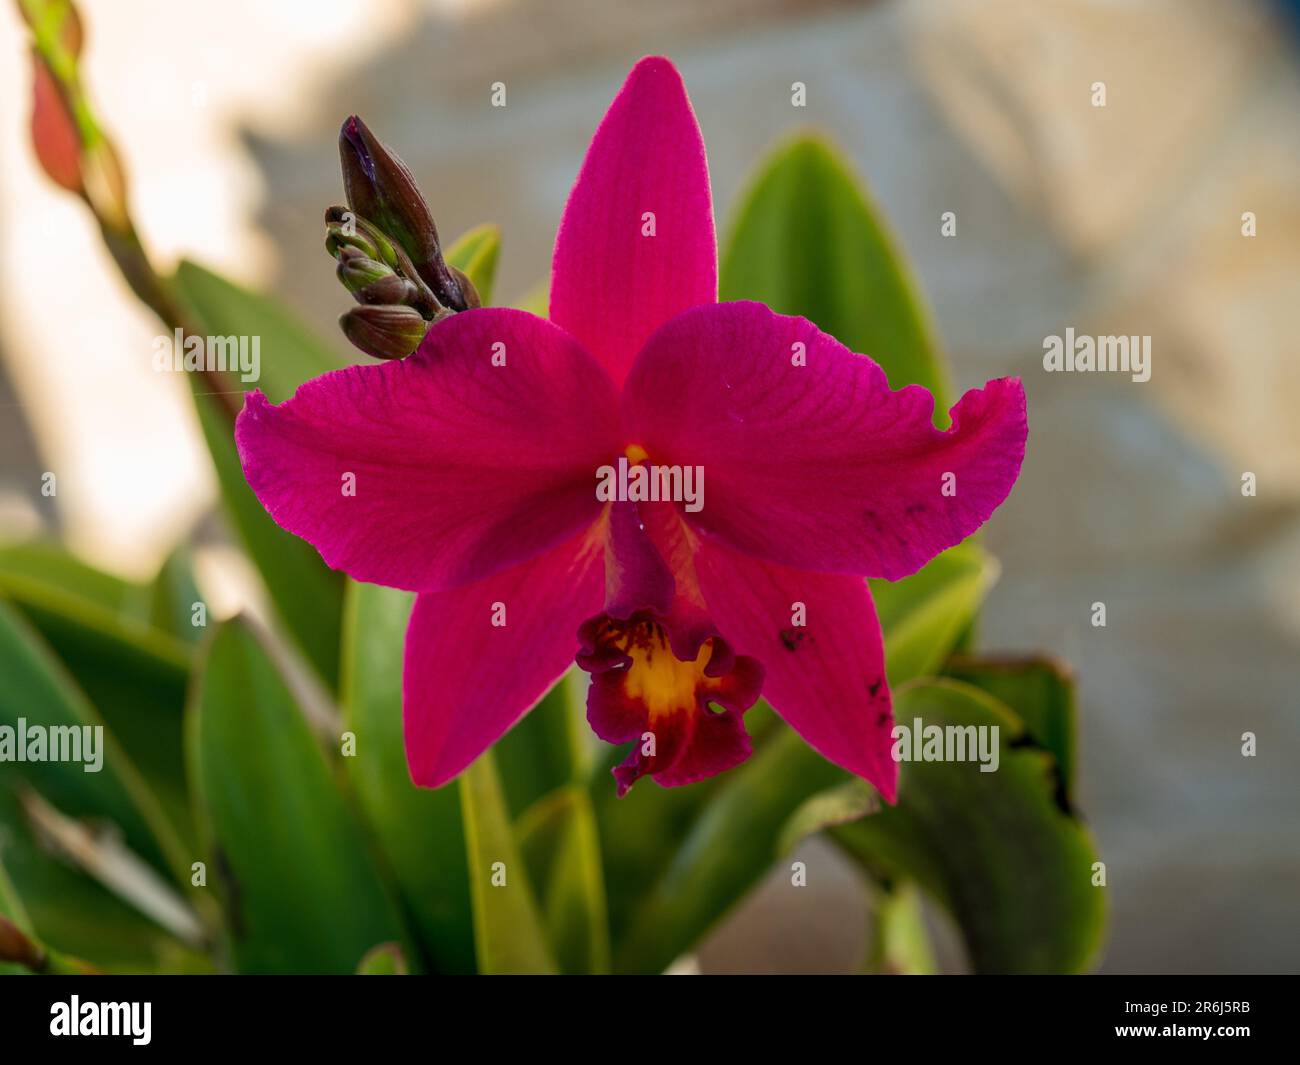 Closeup of cerise red bloom and buds of the Laeliocattleya orchid flower, Hsin Buu Lady, Australian coastal garden Stock Photo